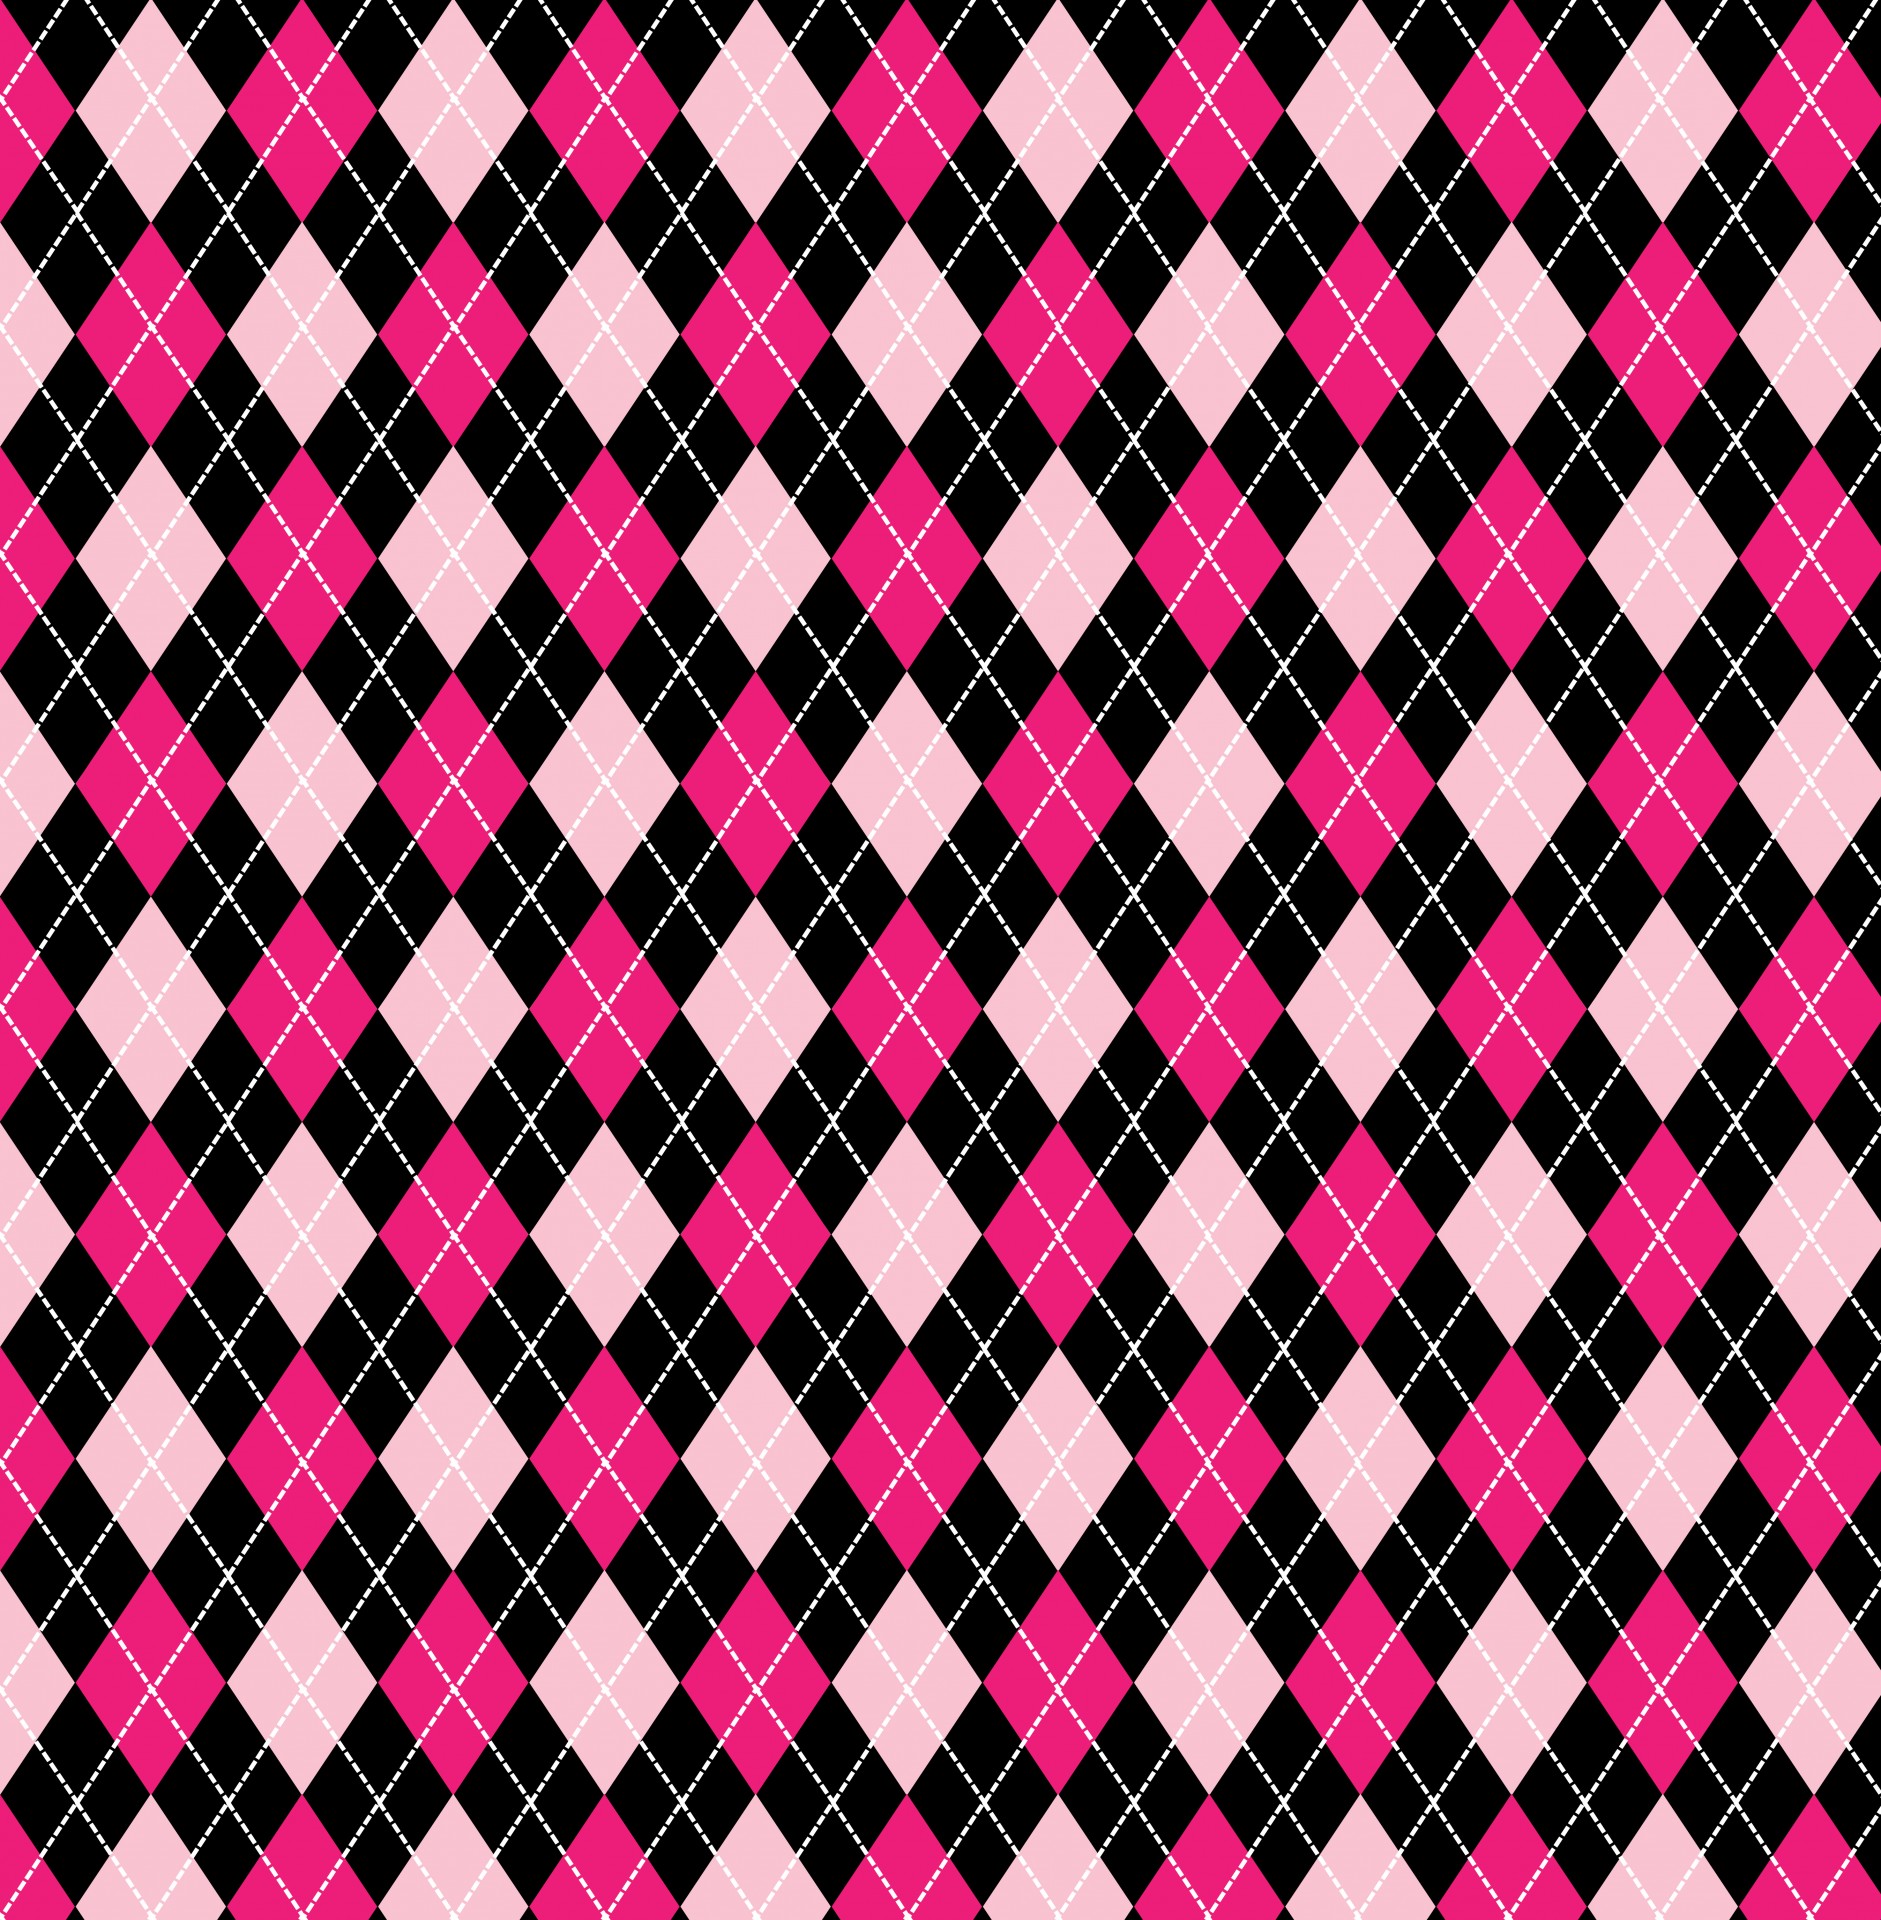 Diamonds argyle pattern in shades of pink and black for scrapbooking